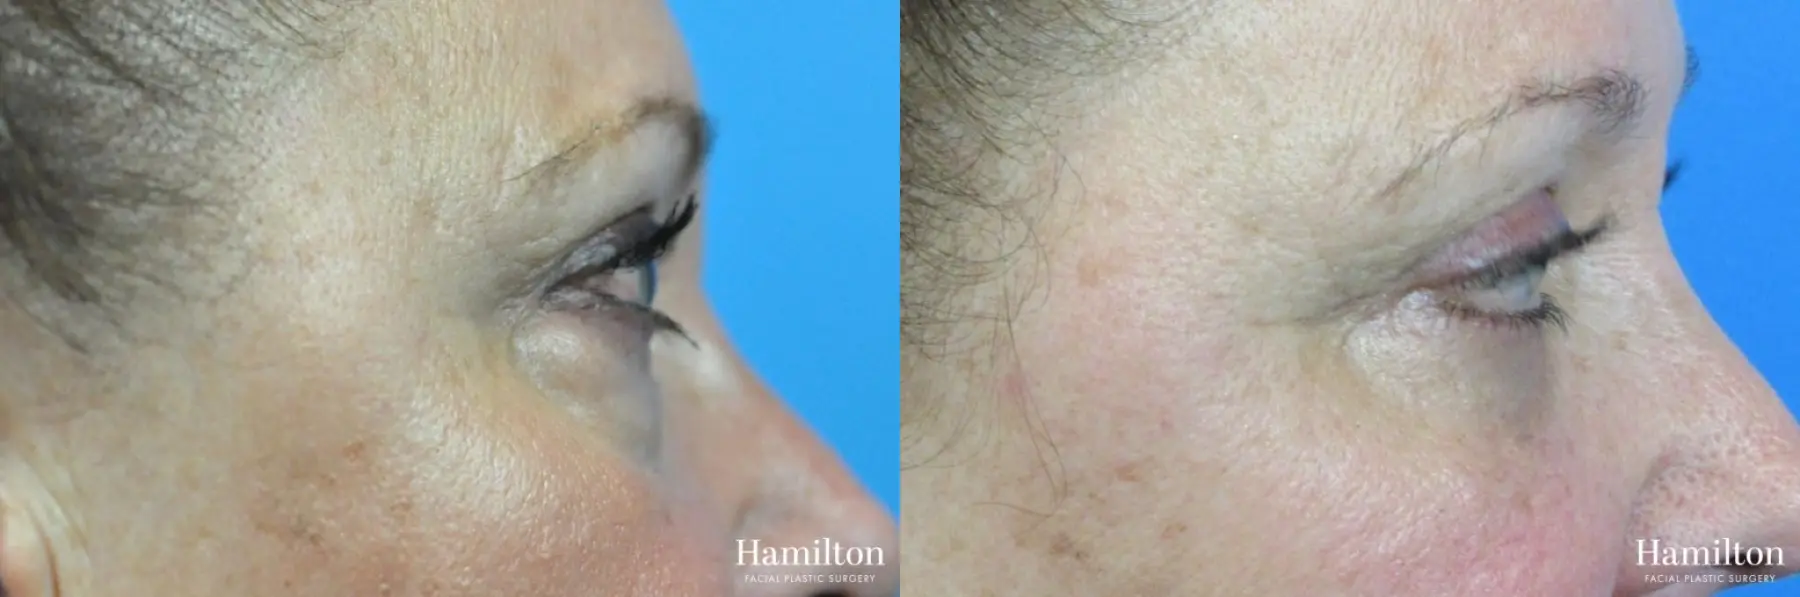 Blepharoplasty: Patient 9 - Before and After 2